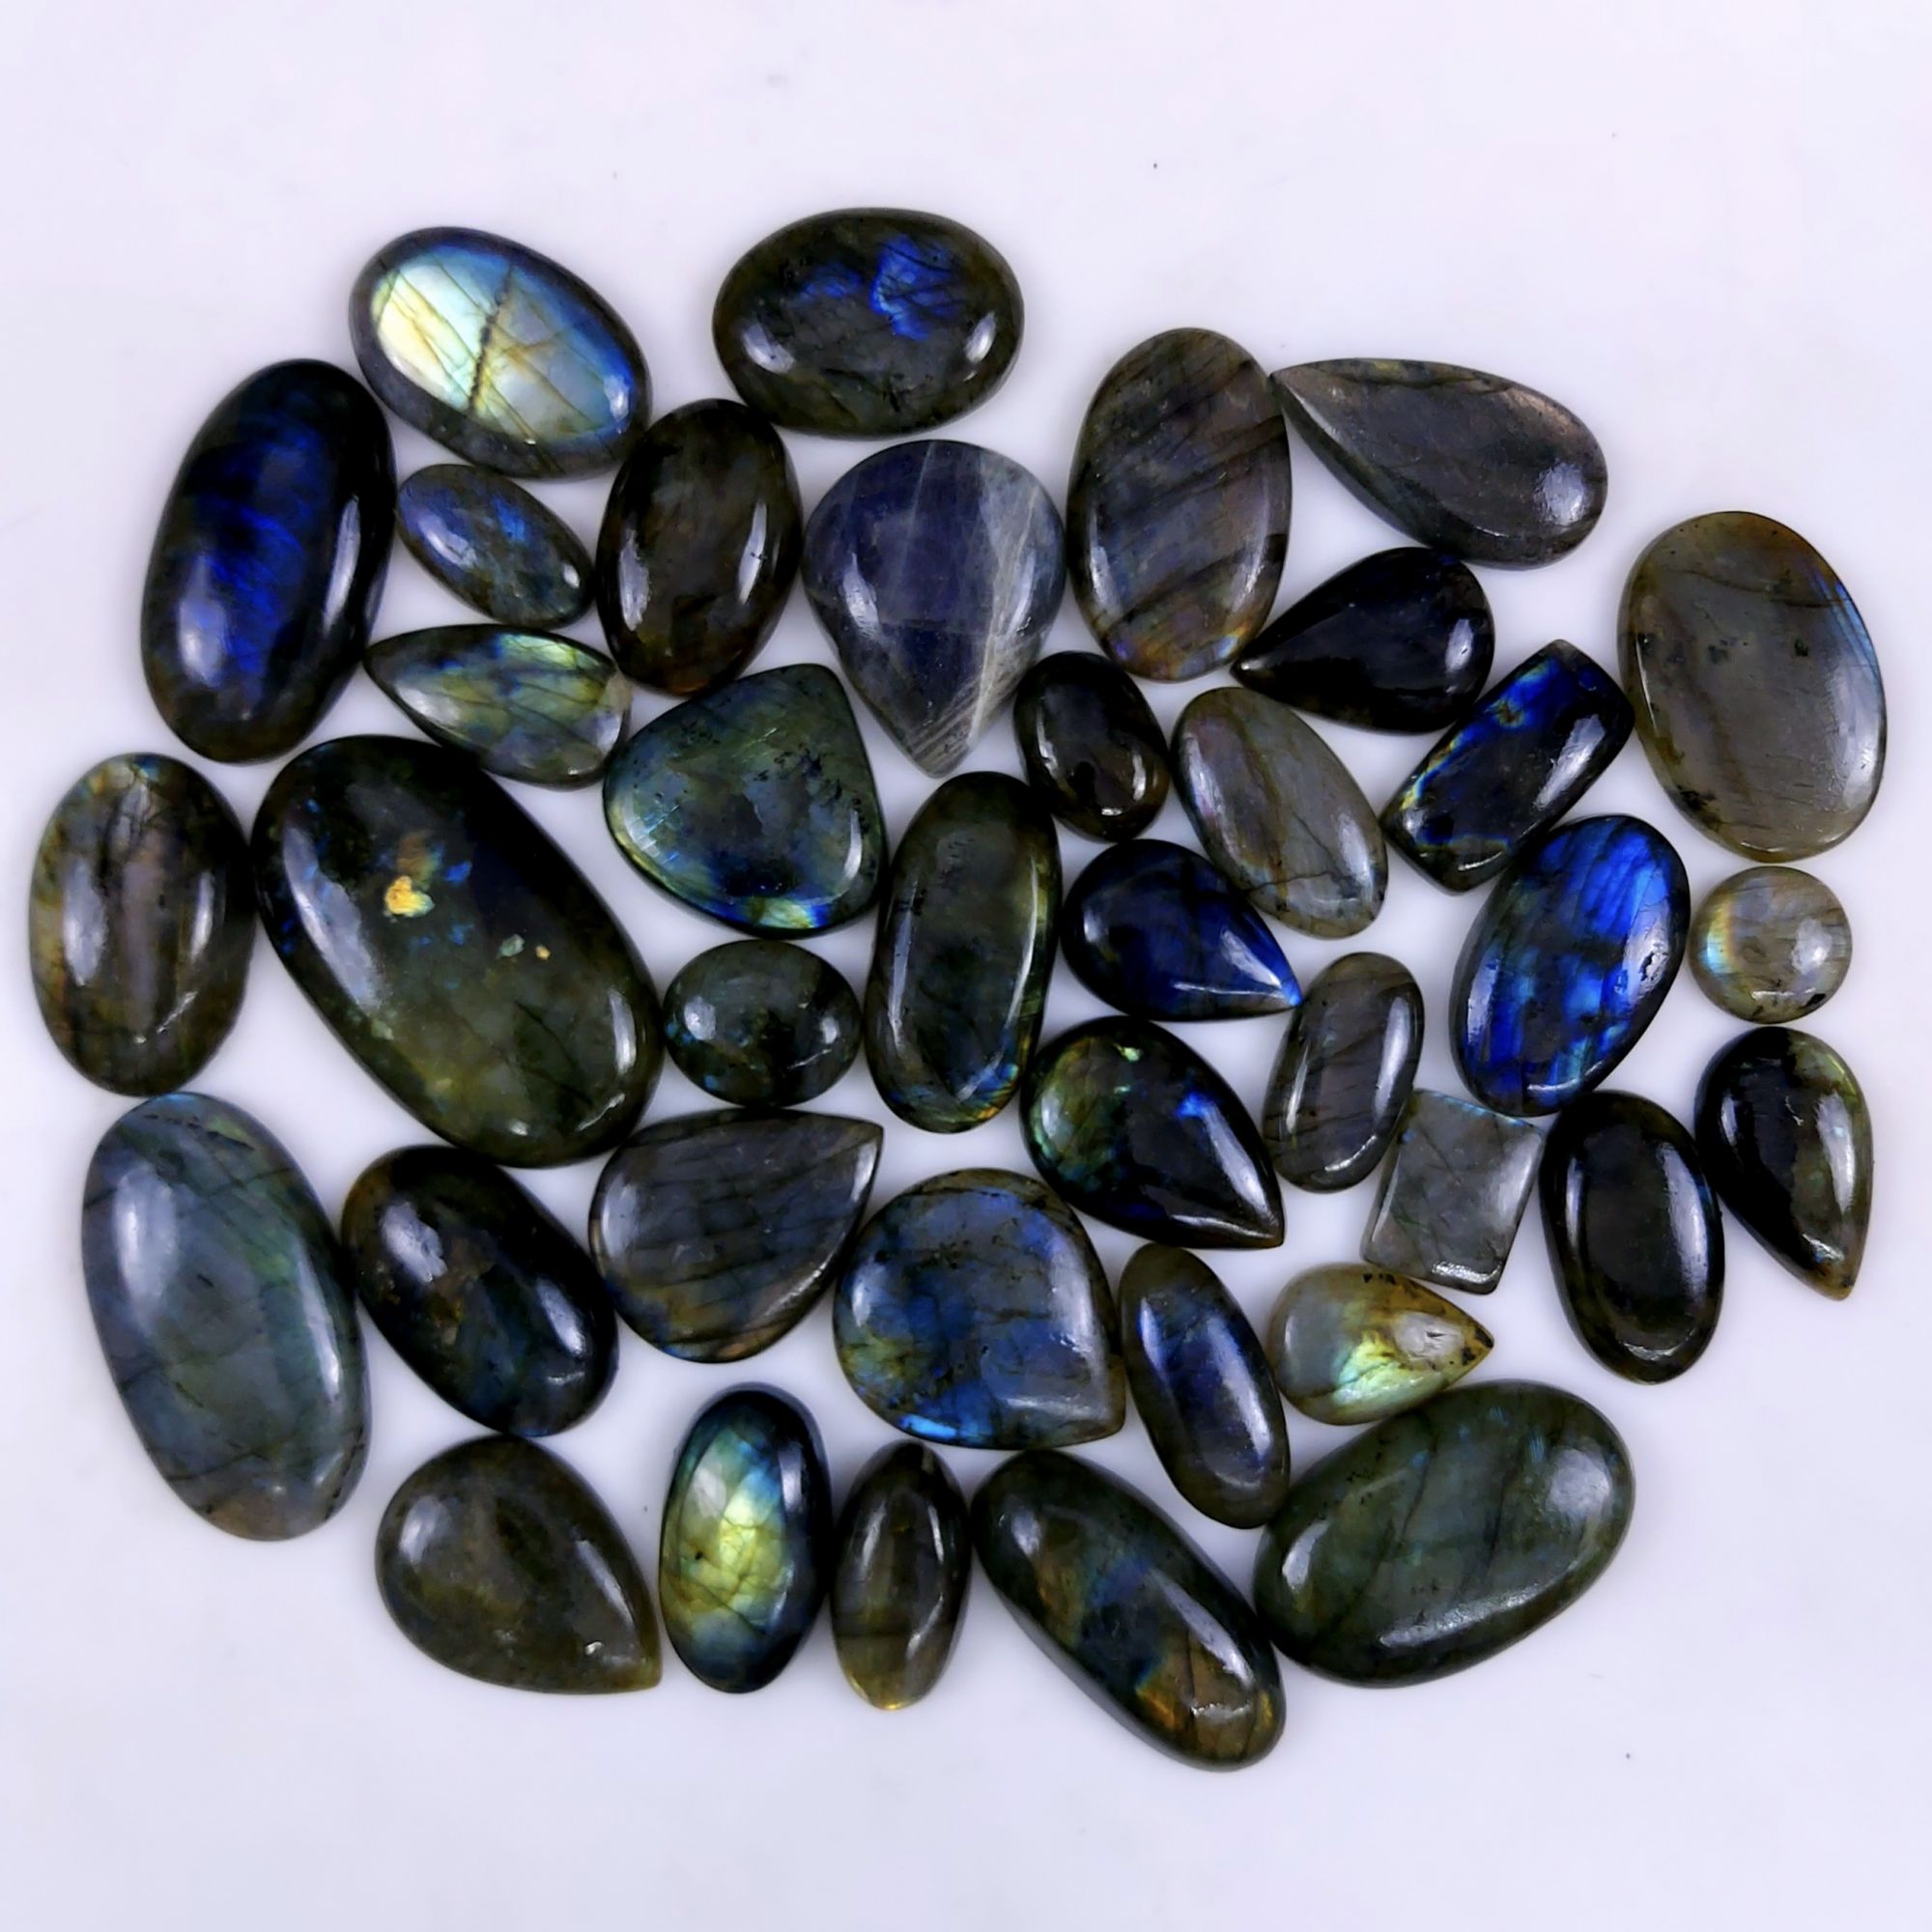 38pc 1532Cts Labradorite Cabochon Multifire Healing Crystal For Jewelry Supplies, Labradorite Necklace Handmade Wire Wrapped Gemstone Pendant 50x30 20x15mm#6304